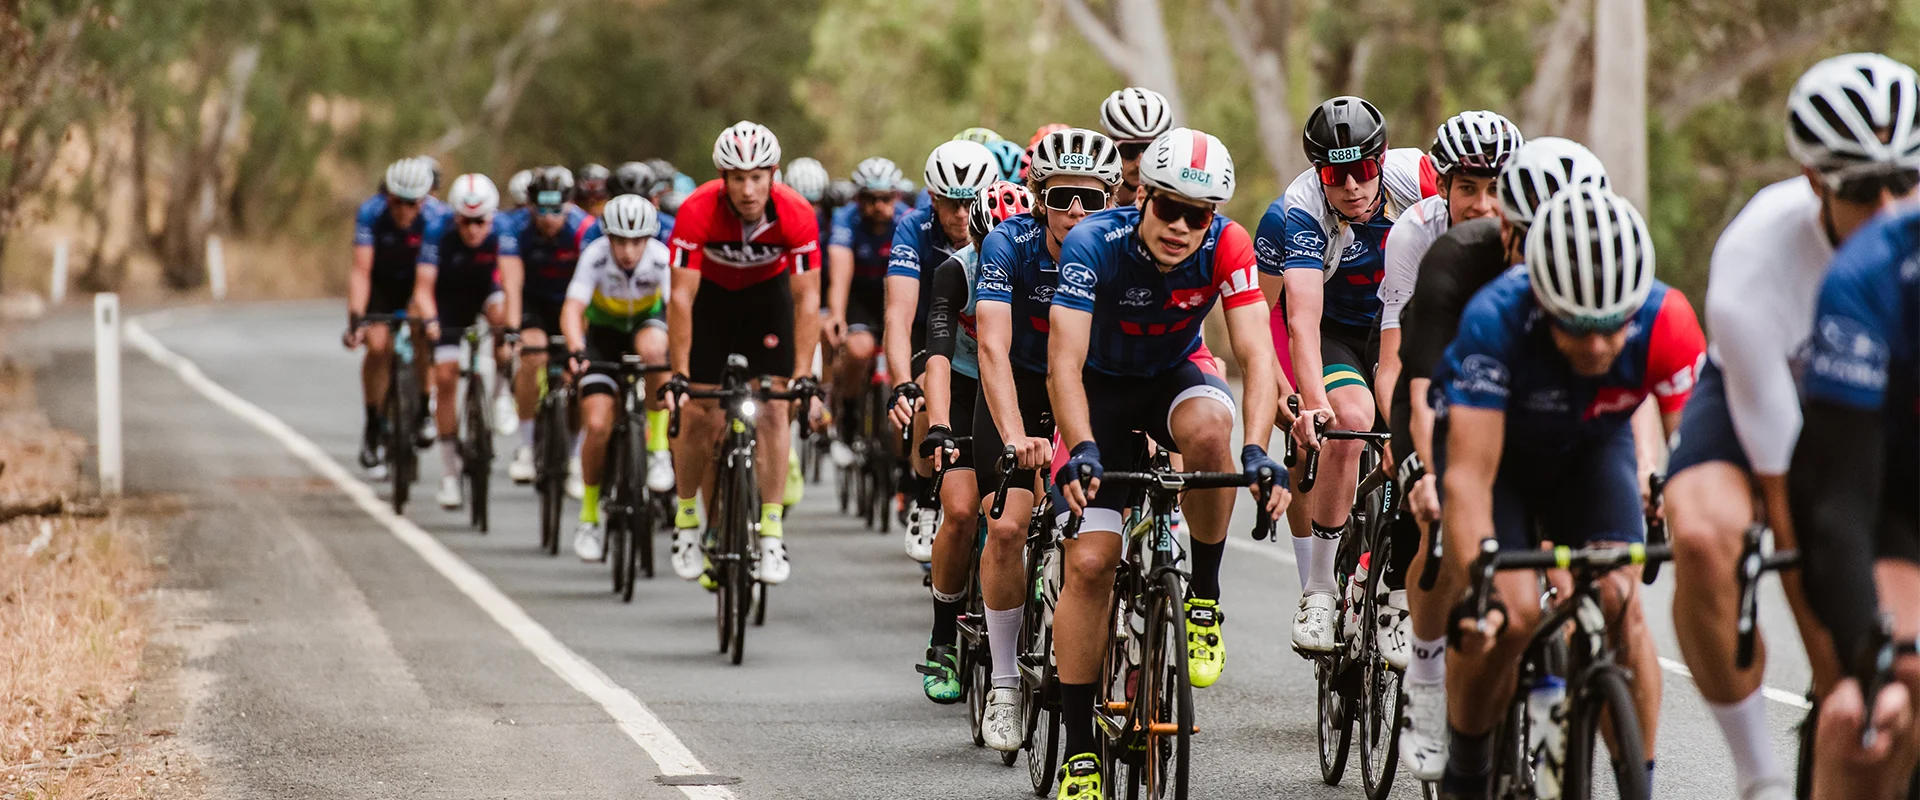 A group of amateur road cyclists rides through the Australian bush near Adelaide.